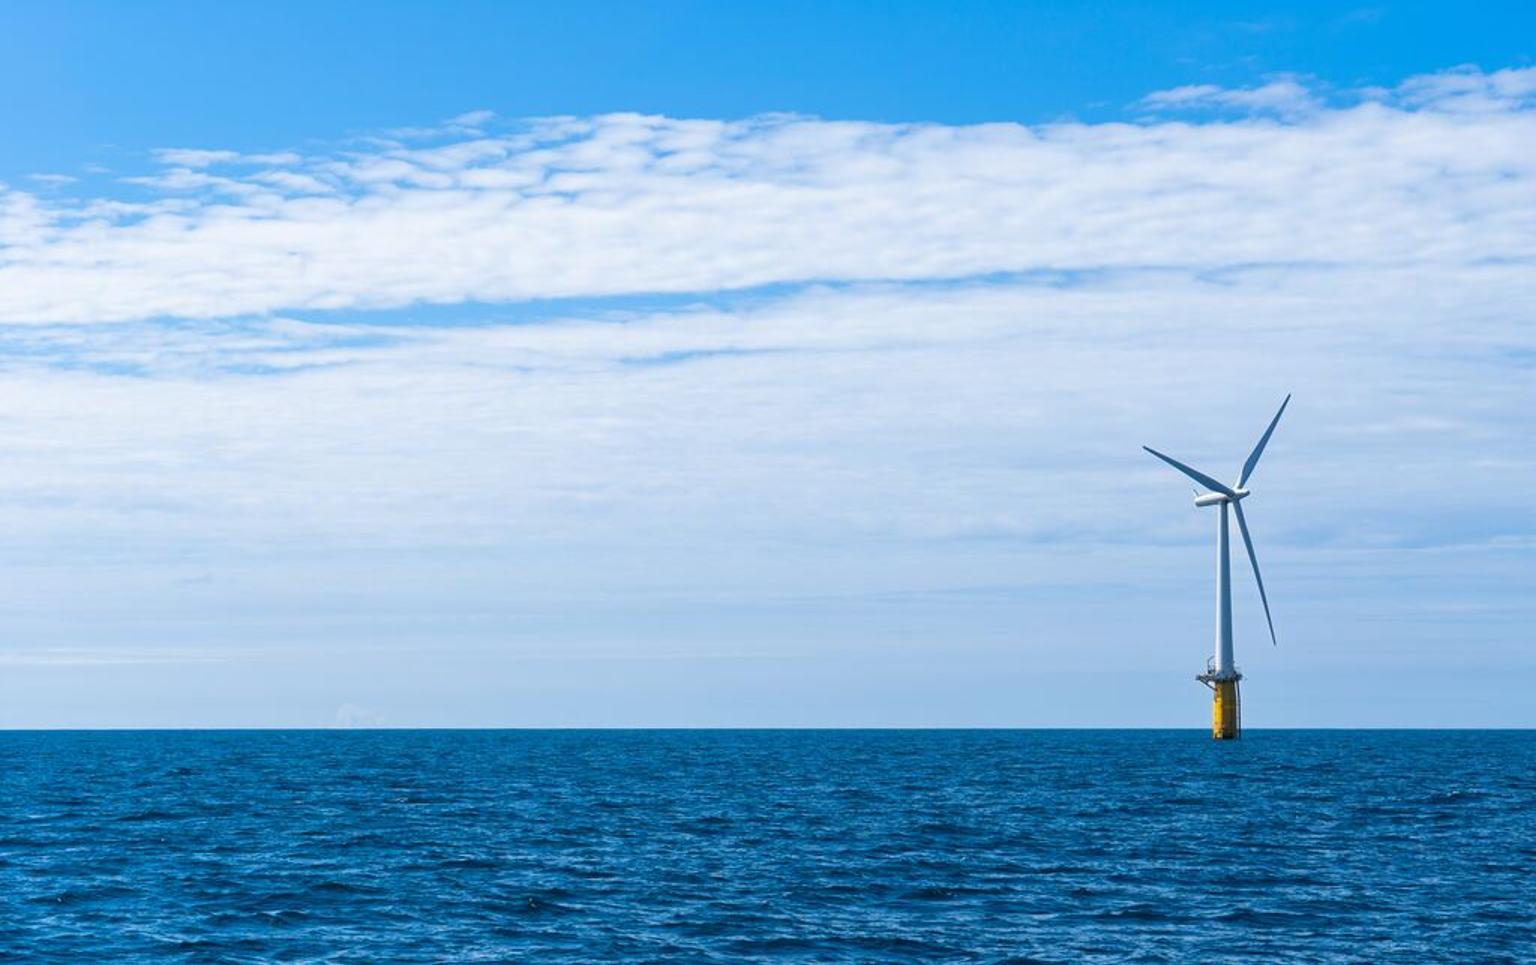 Zephyros floating offshore wind turbine in the North Sea